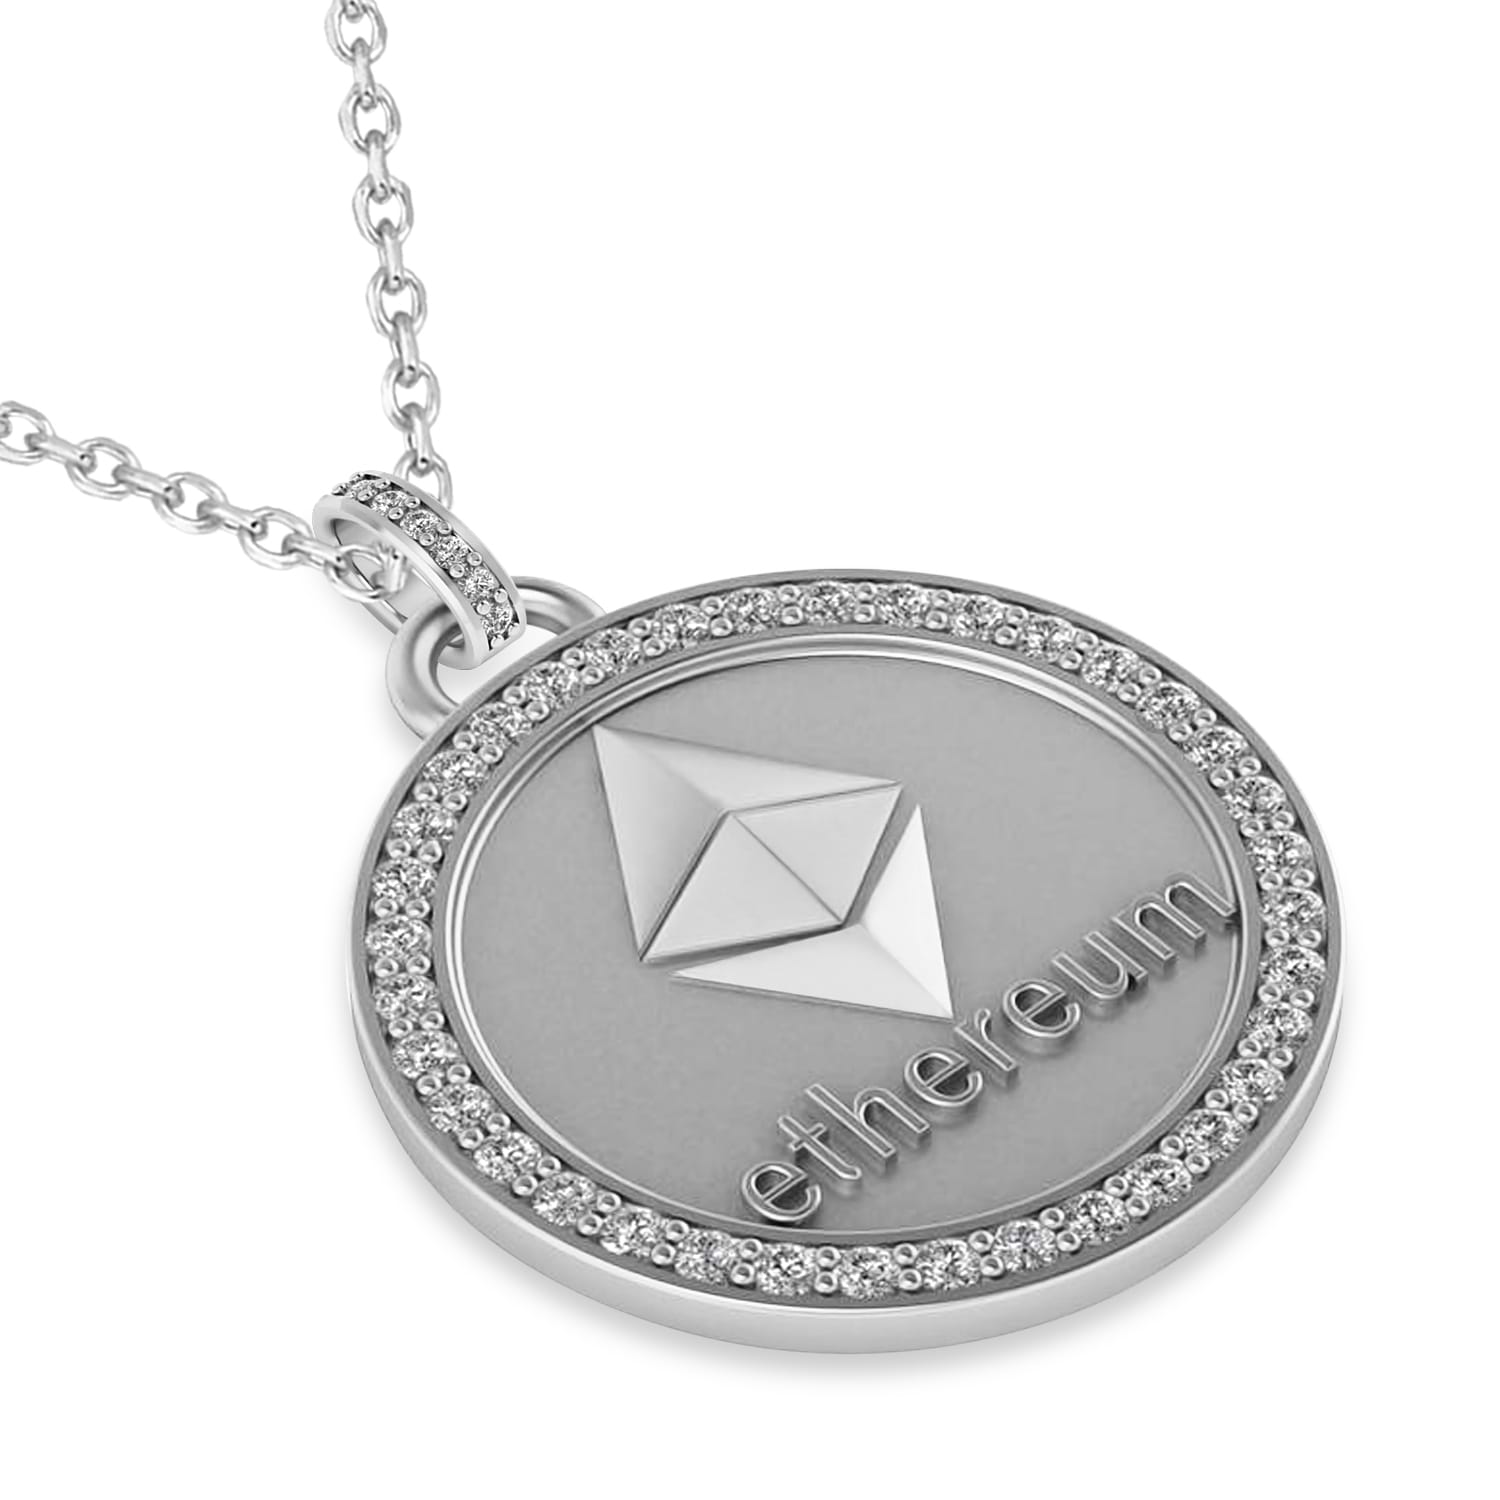 Diamond Cryptocurrency Ethereum Pendant Necklace With Bail 18k White Gold (0.44ct)